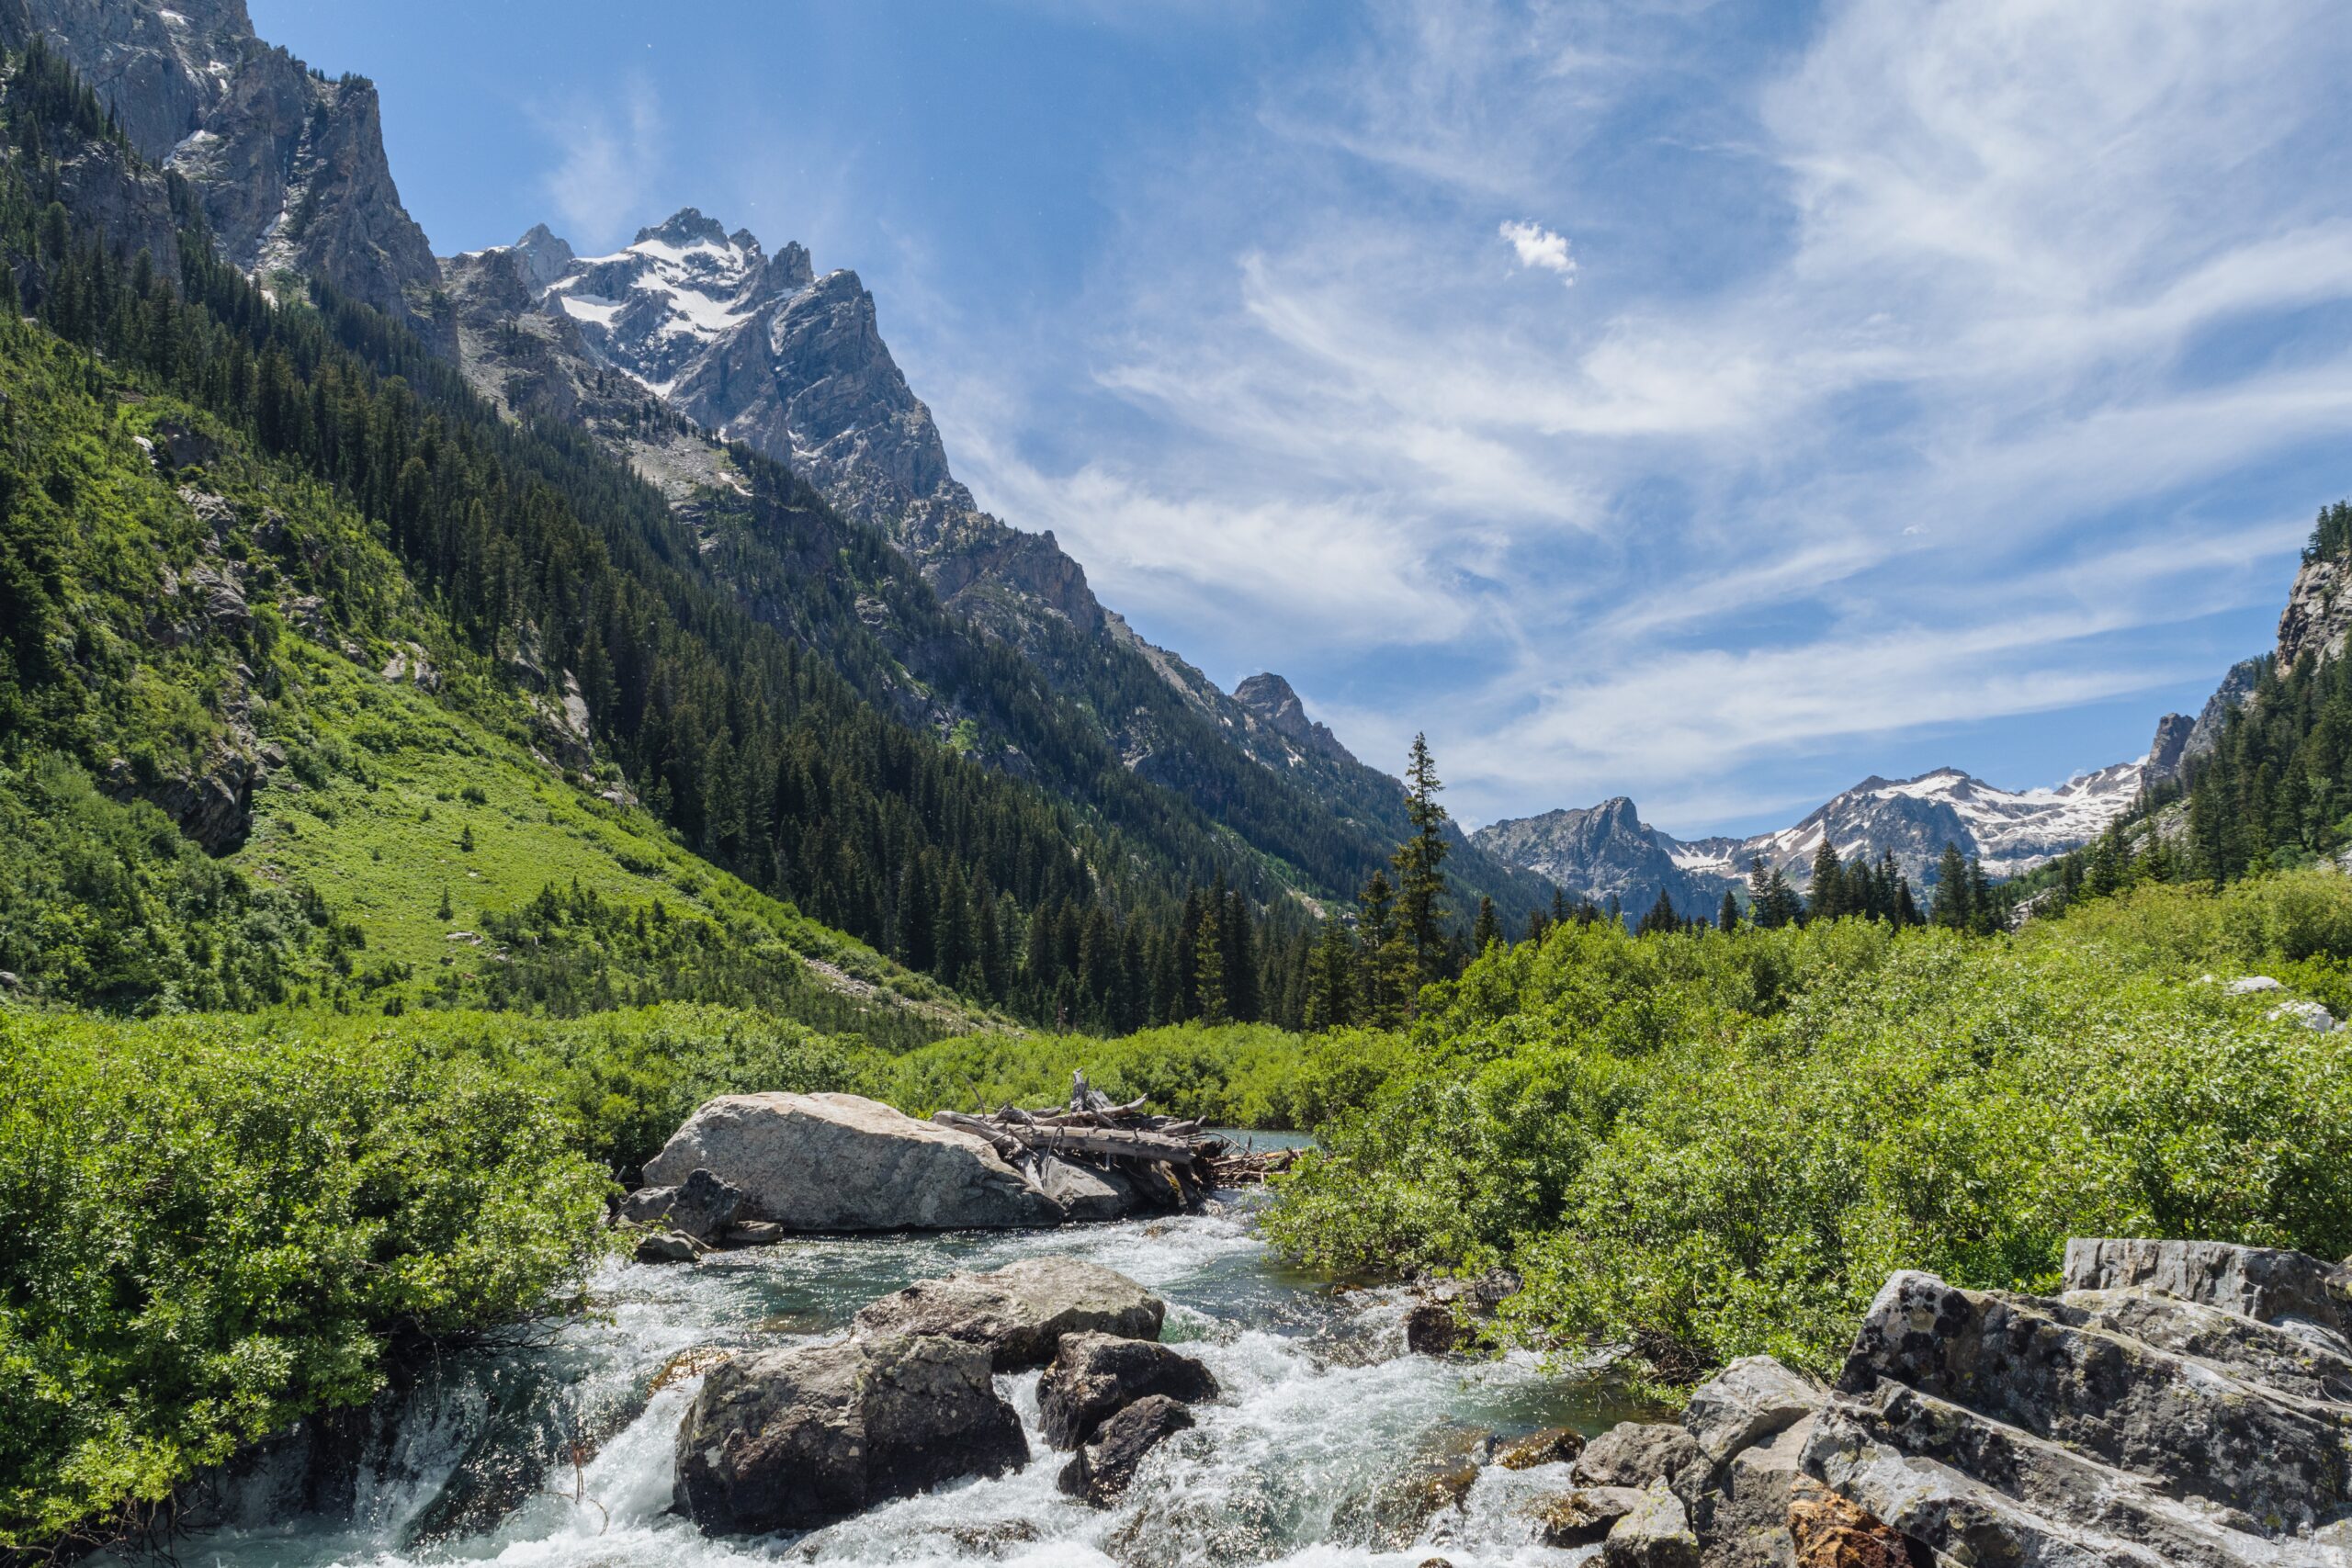 Jackson is a great Wyoming city for those looking to enjoy national parks, ski resorts and tourist attractions. Pictured: The Grand Teton National Park mountains at Jackson.